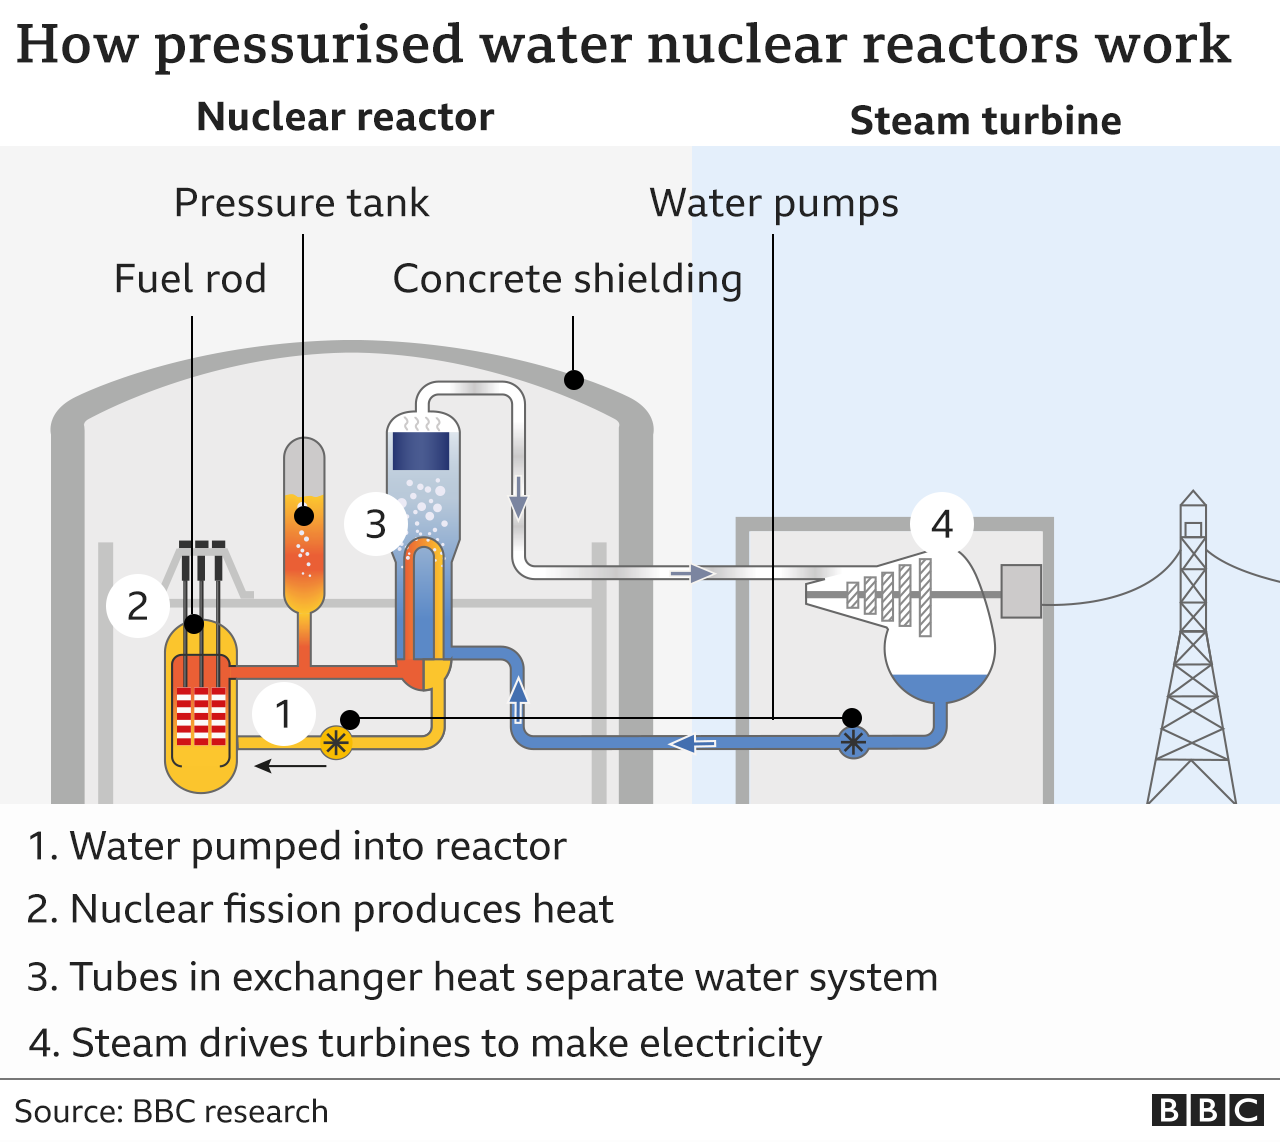 Graphic showing how pressurised water nuclear reactors work